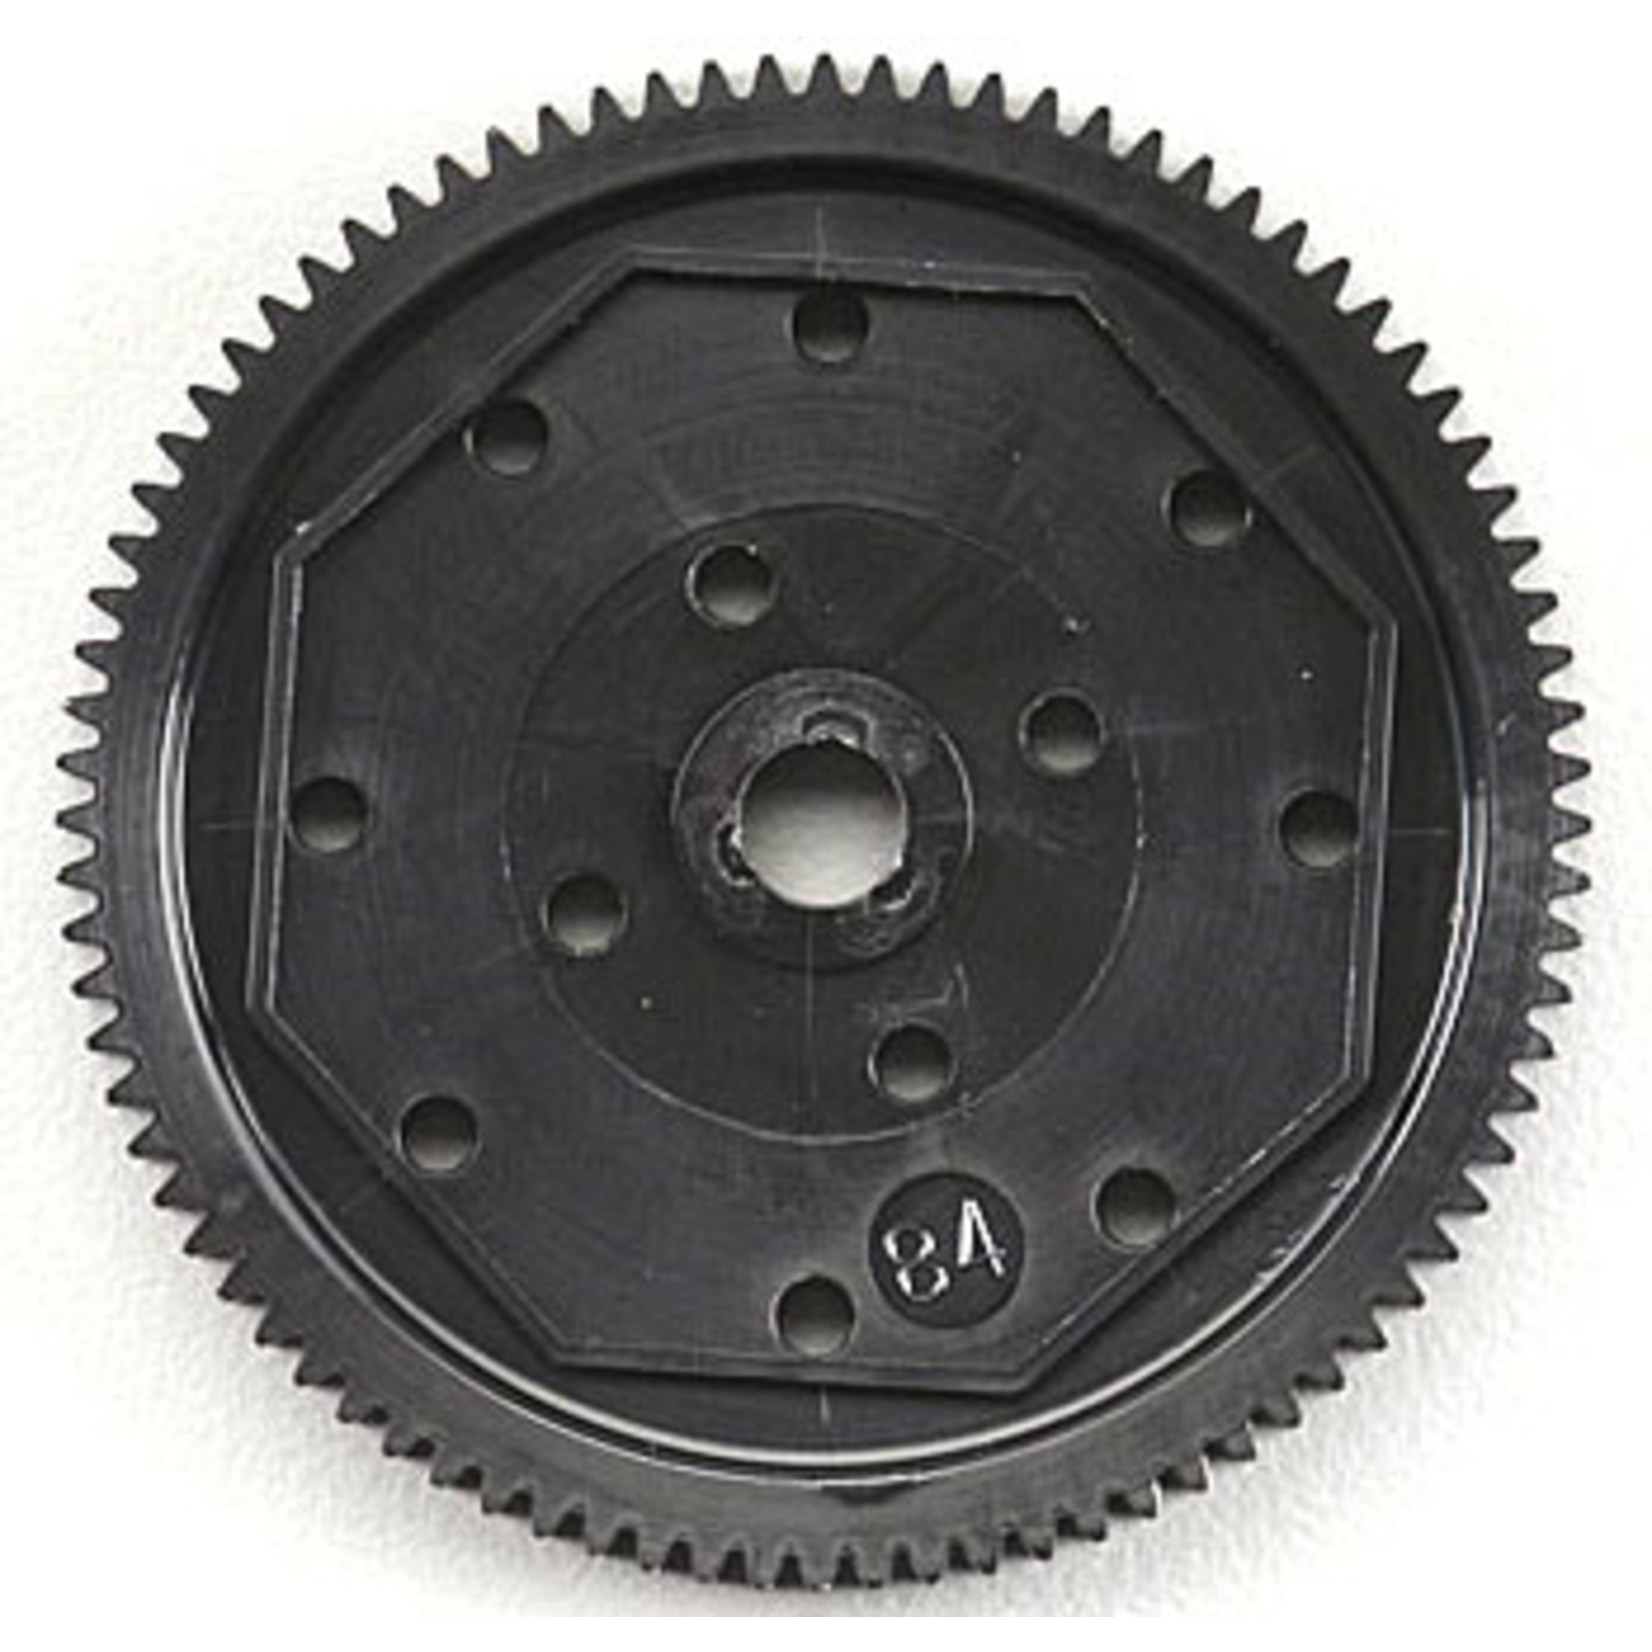 Kimbrough KIM302 - 69 Tooth 48 Pitch Slipper Gear for B6, SC10